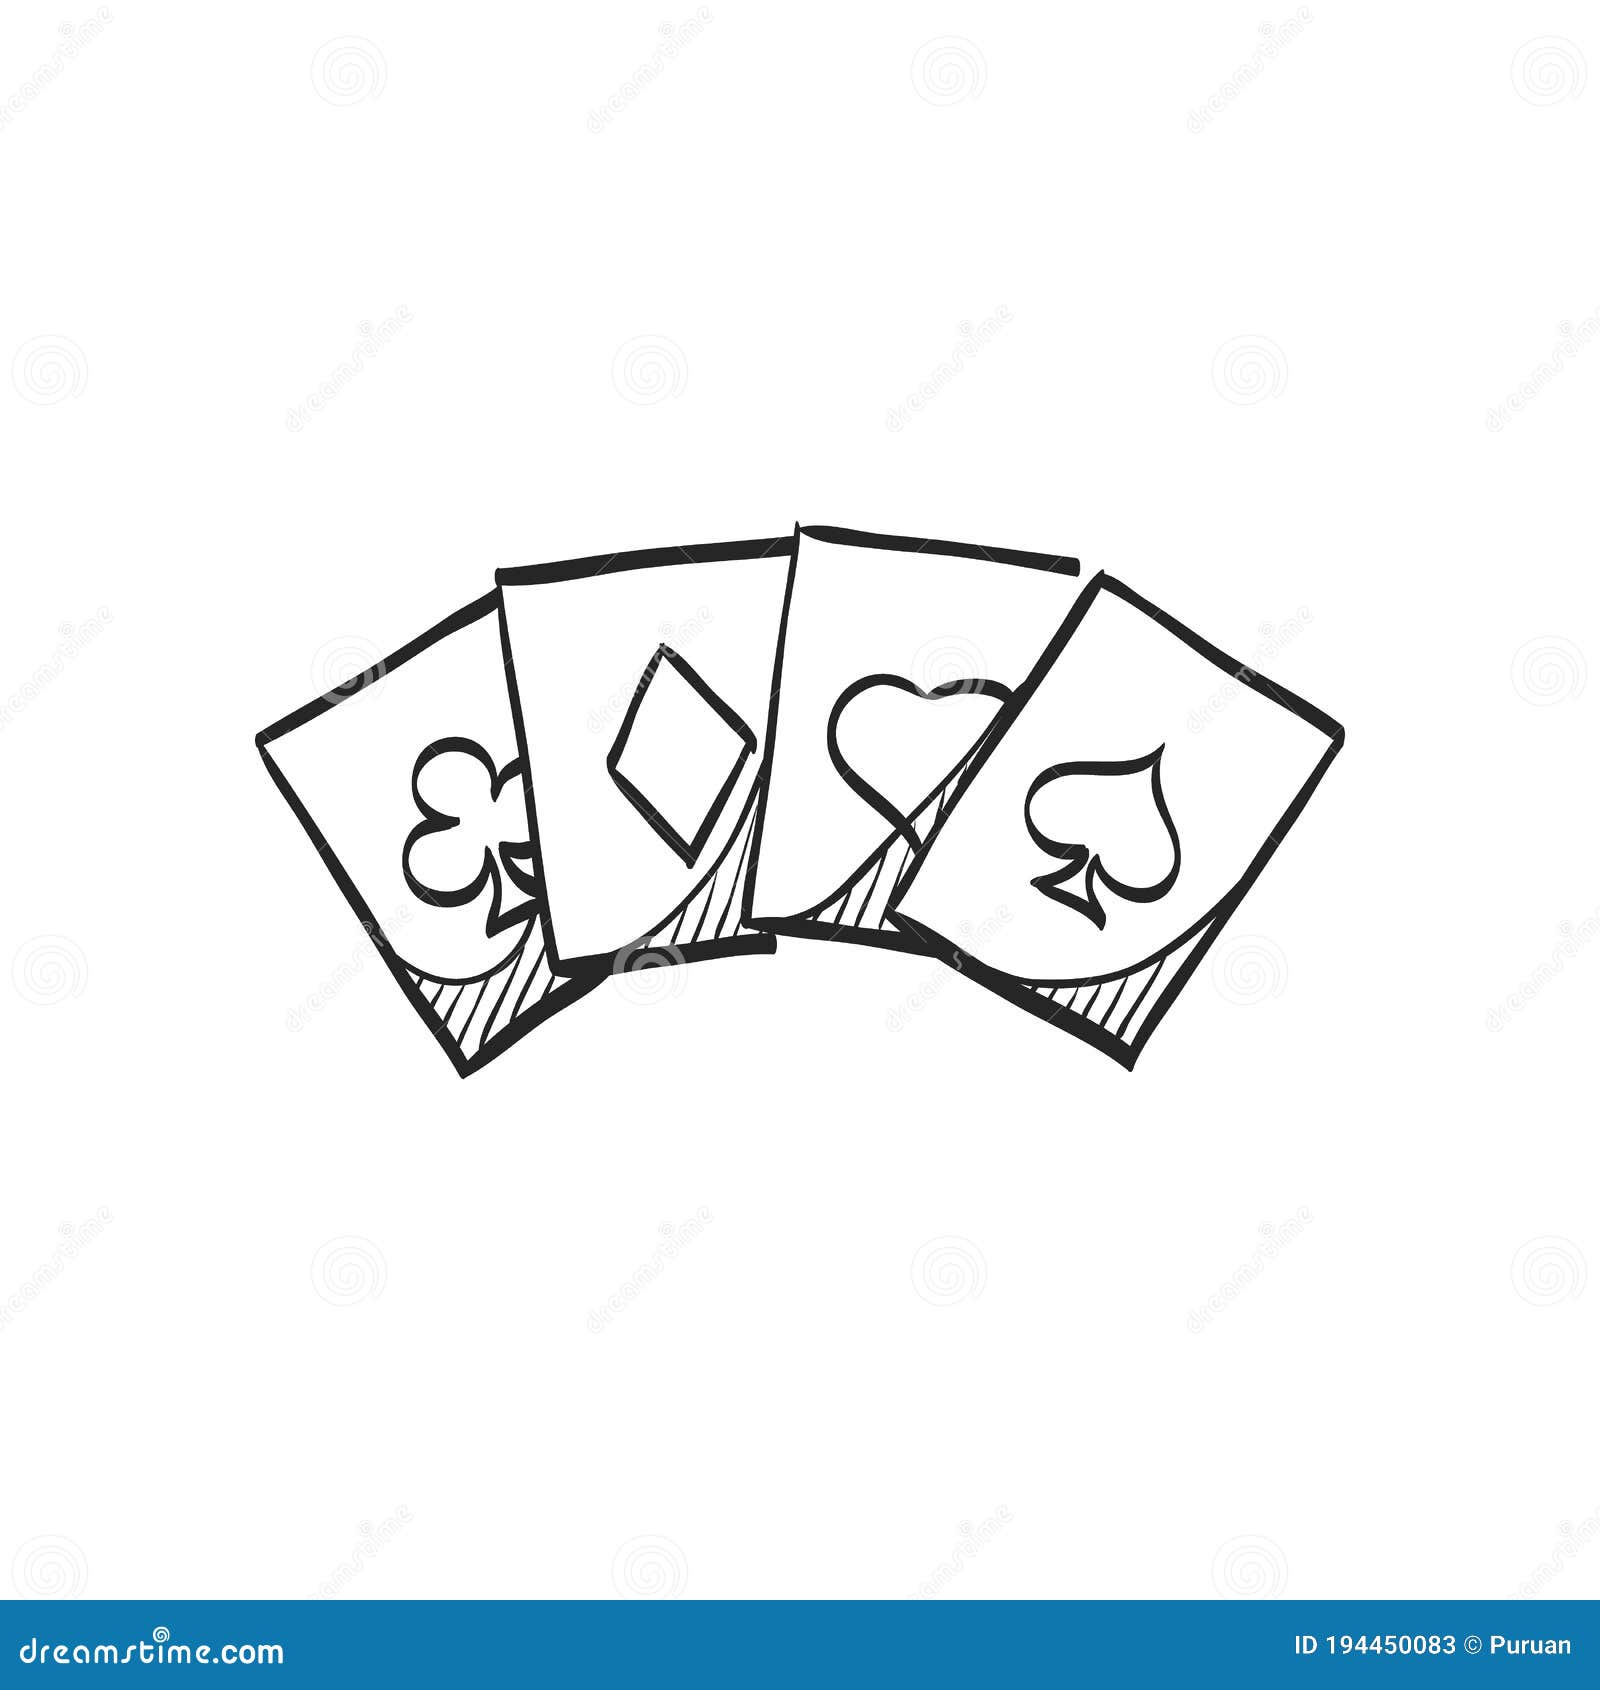 Sketch Icon - Playing Cards Stock Vector - Illustration of icon ...